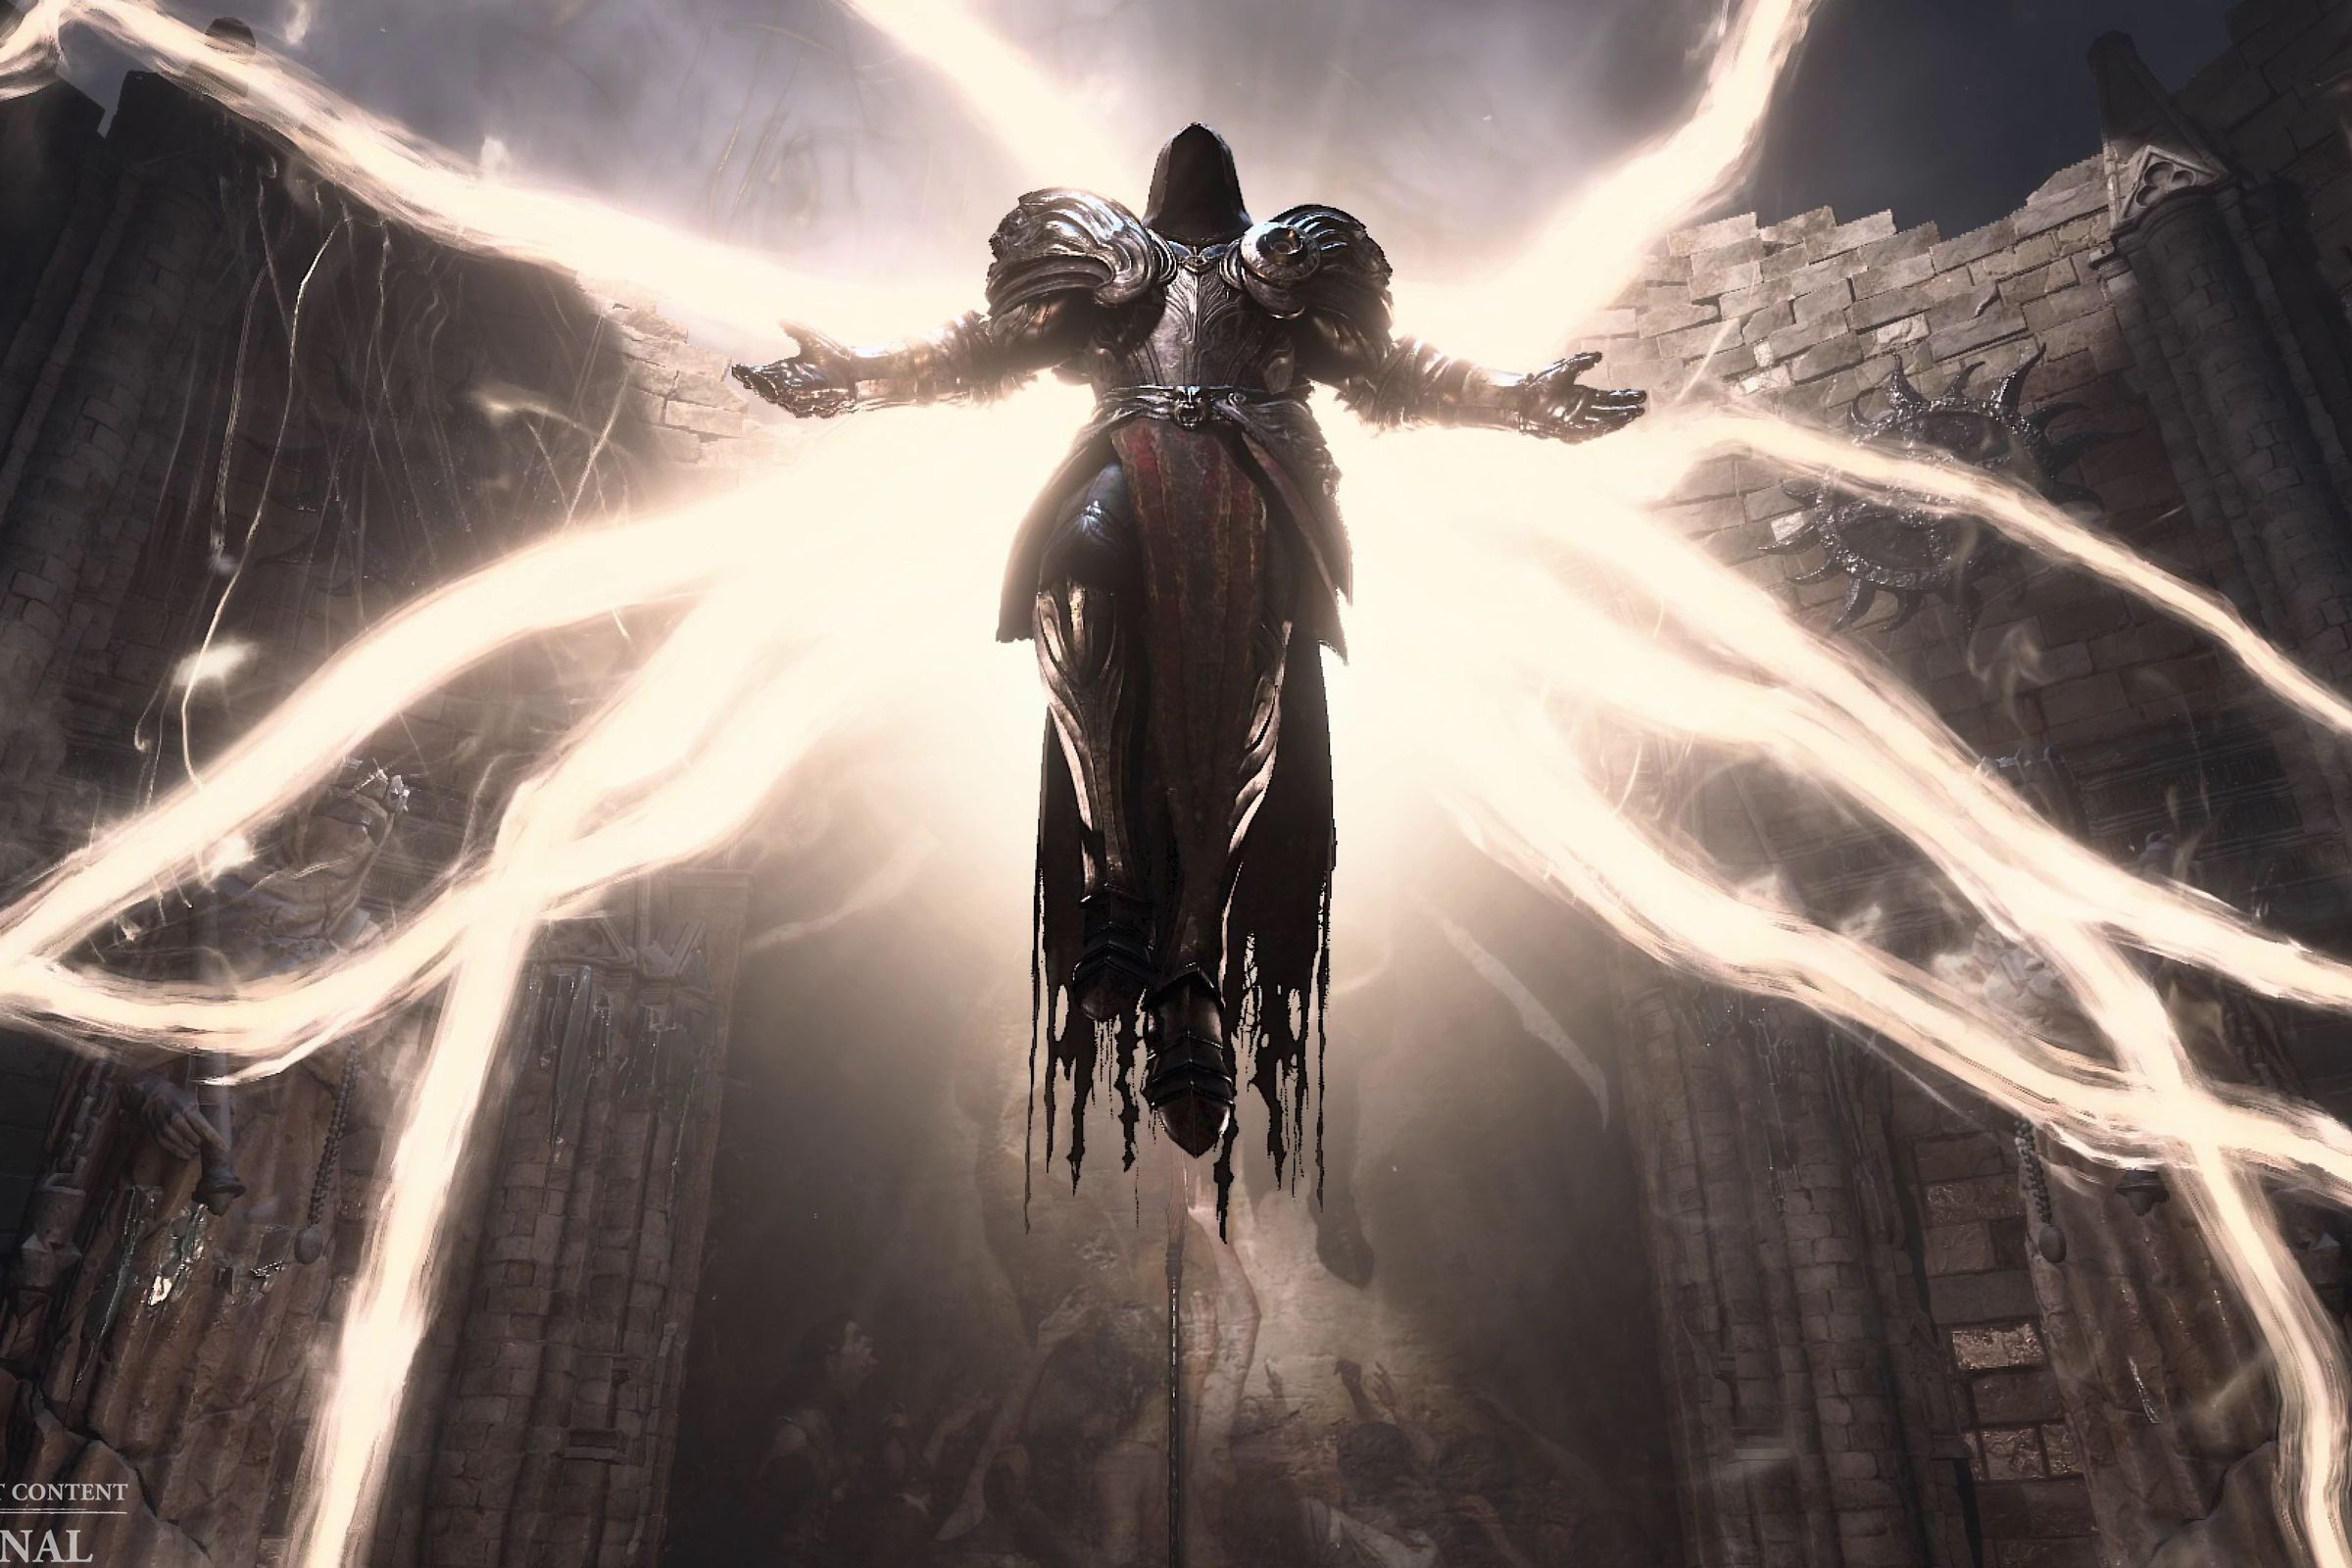 Screenshot from Diablo IV featuring an angel descending from on high their stringy, spectral wings snaking out from behind them